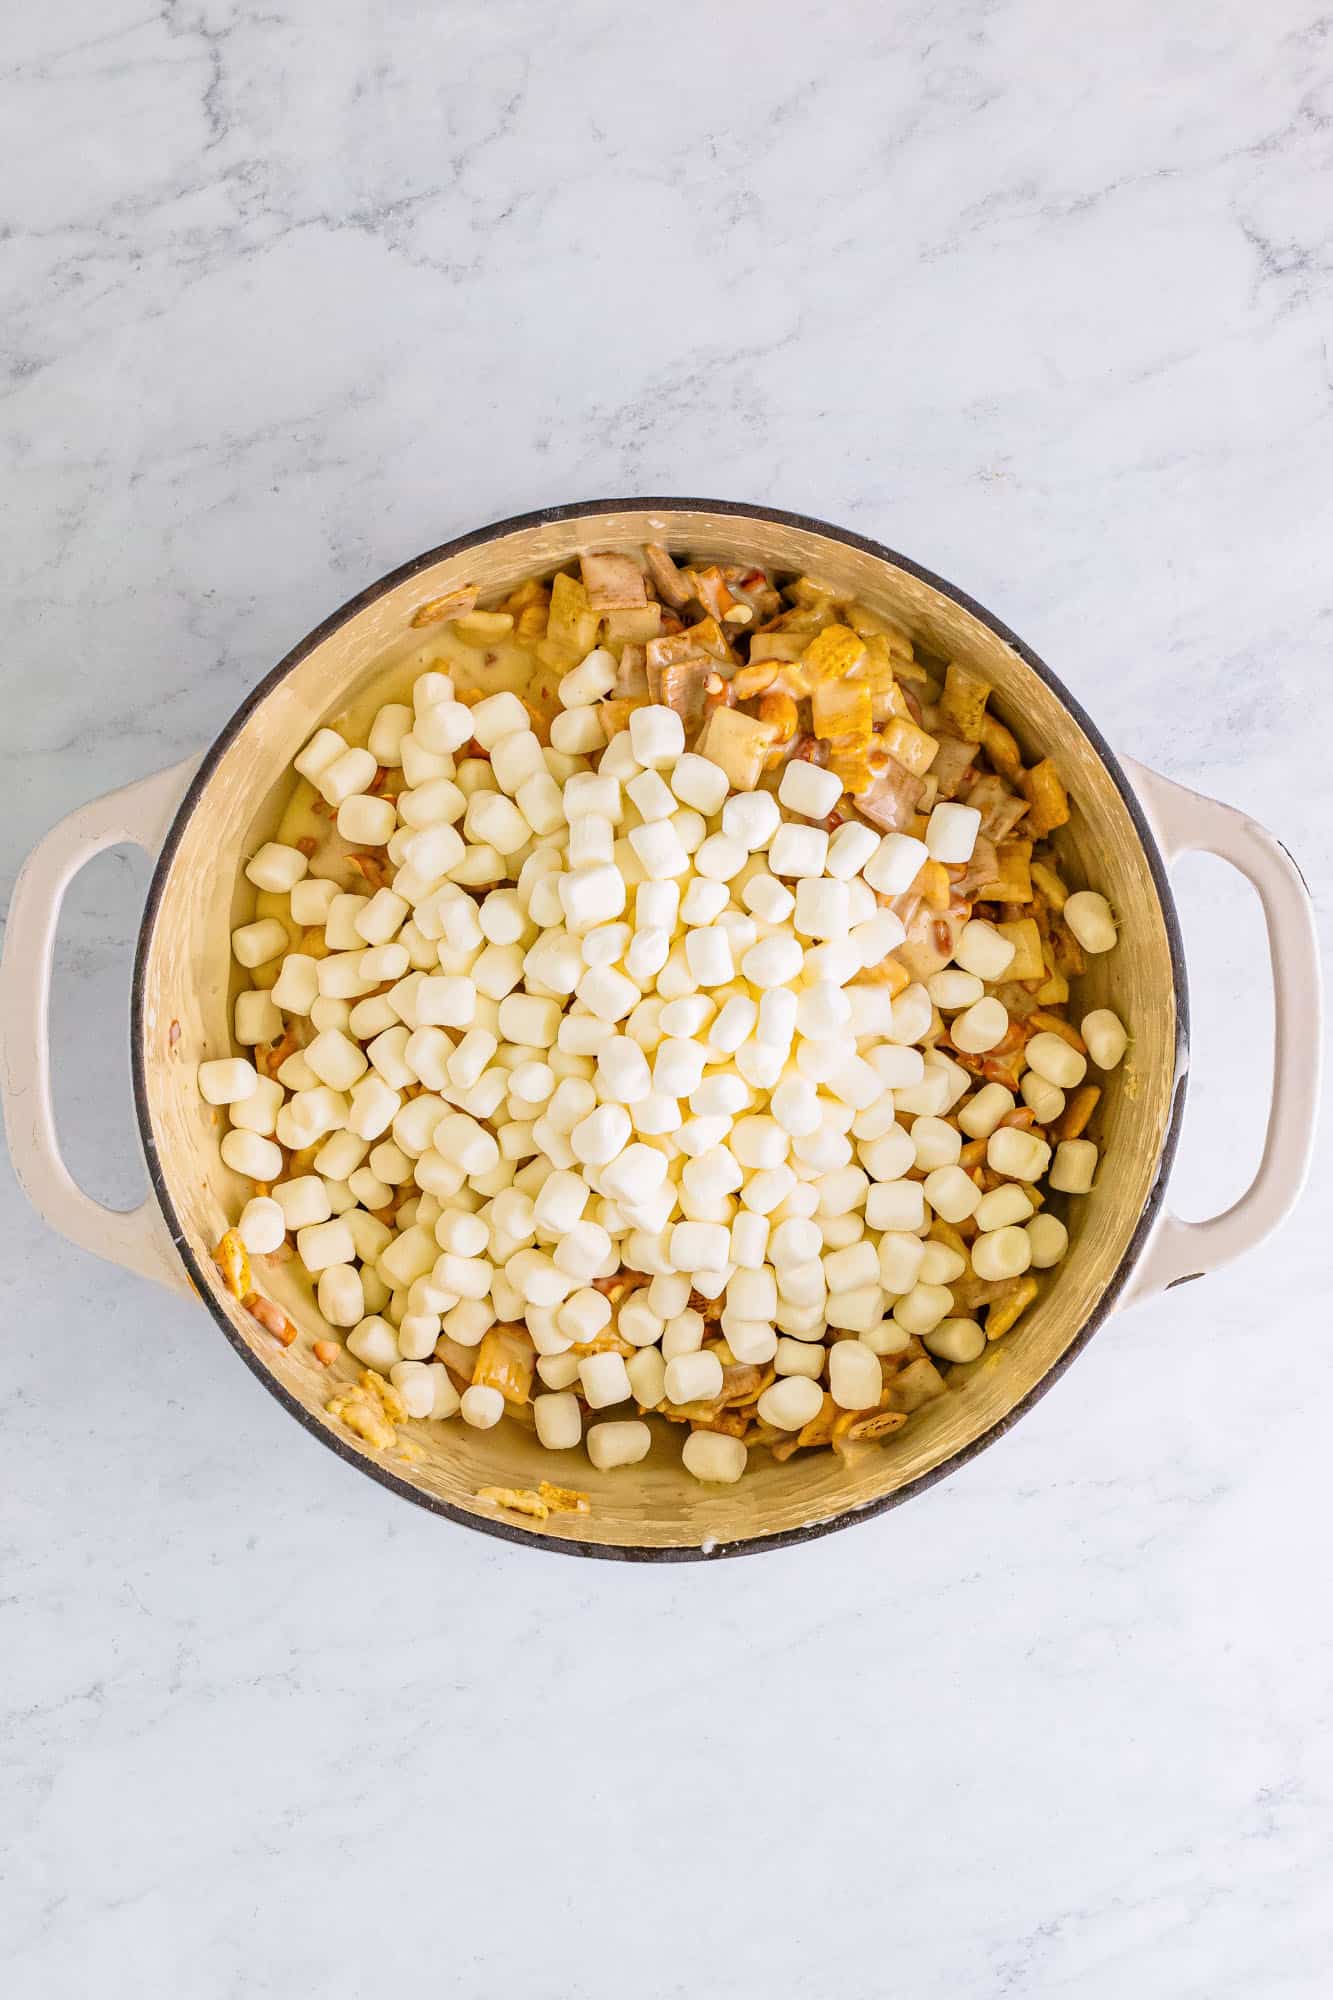 Mini marshmallows, chex, pretzels, and nuts added to a pot of melted butter and marshmallows to make chex mix treats.